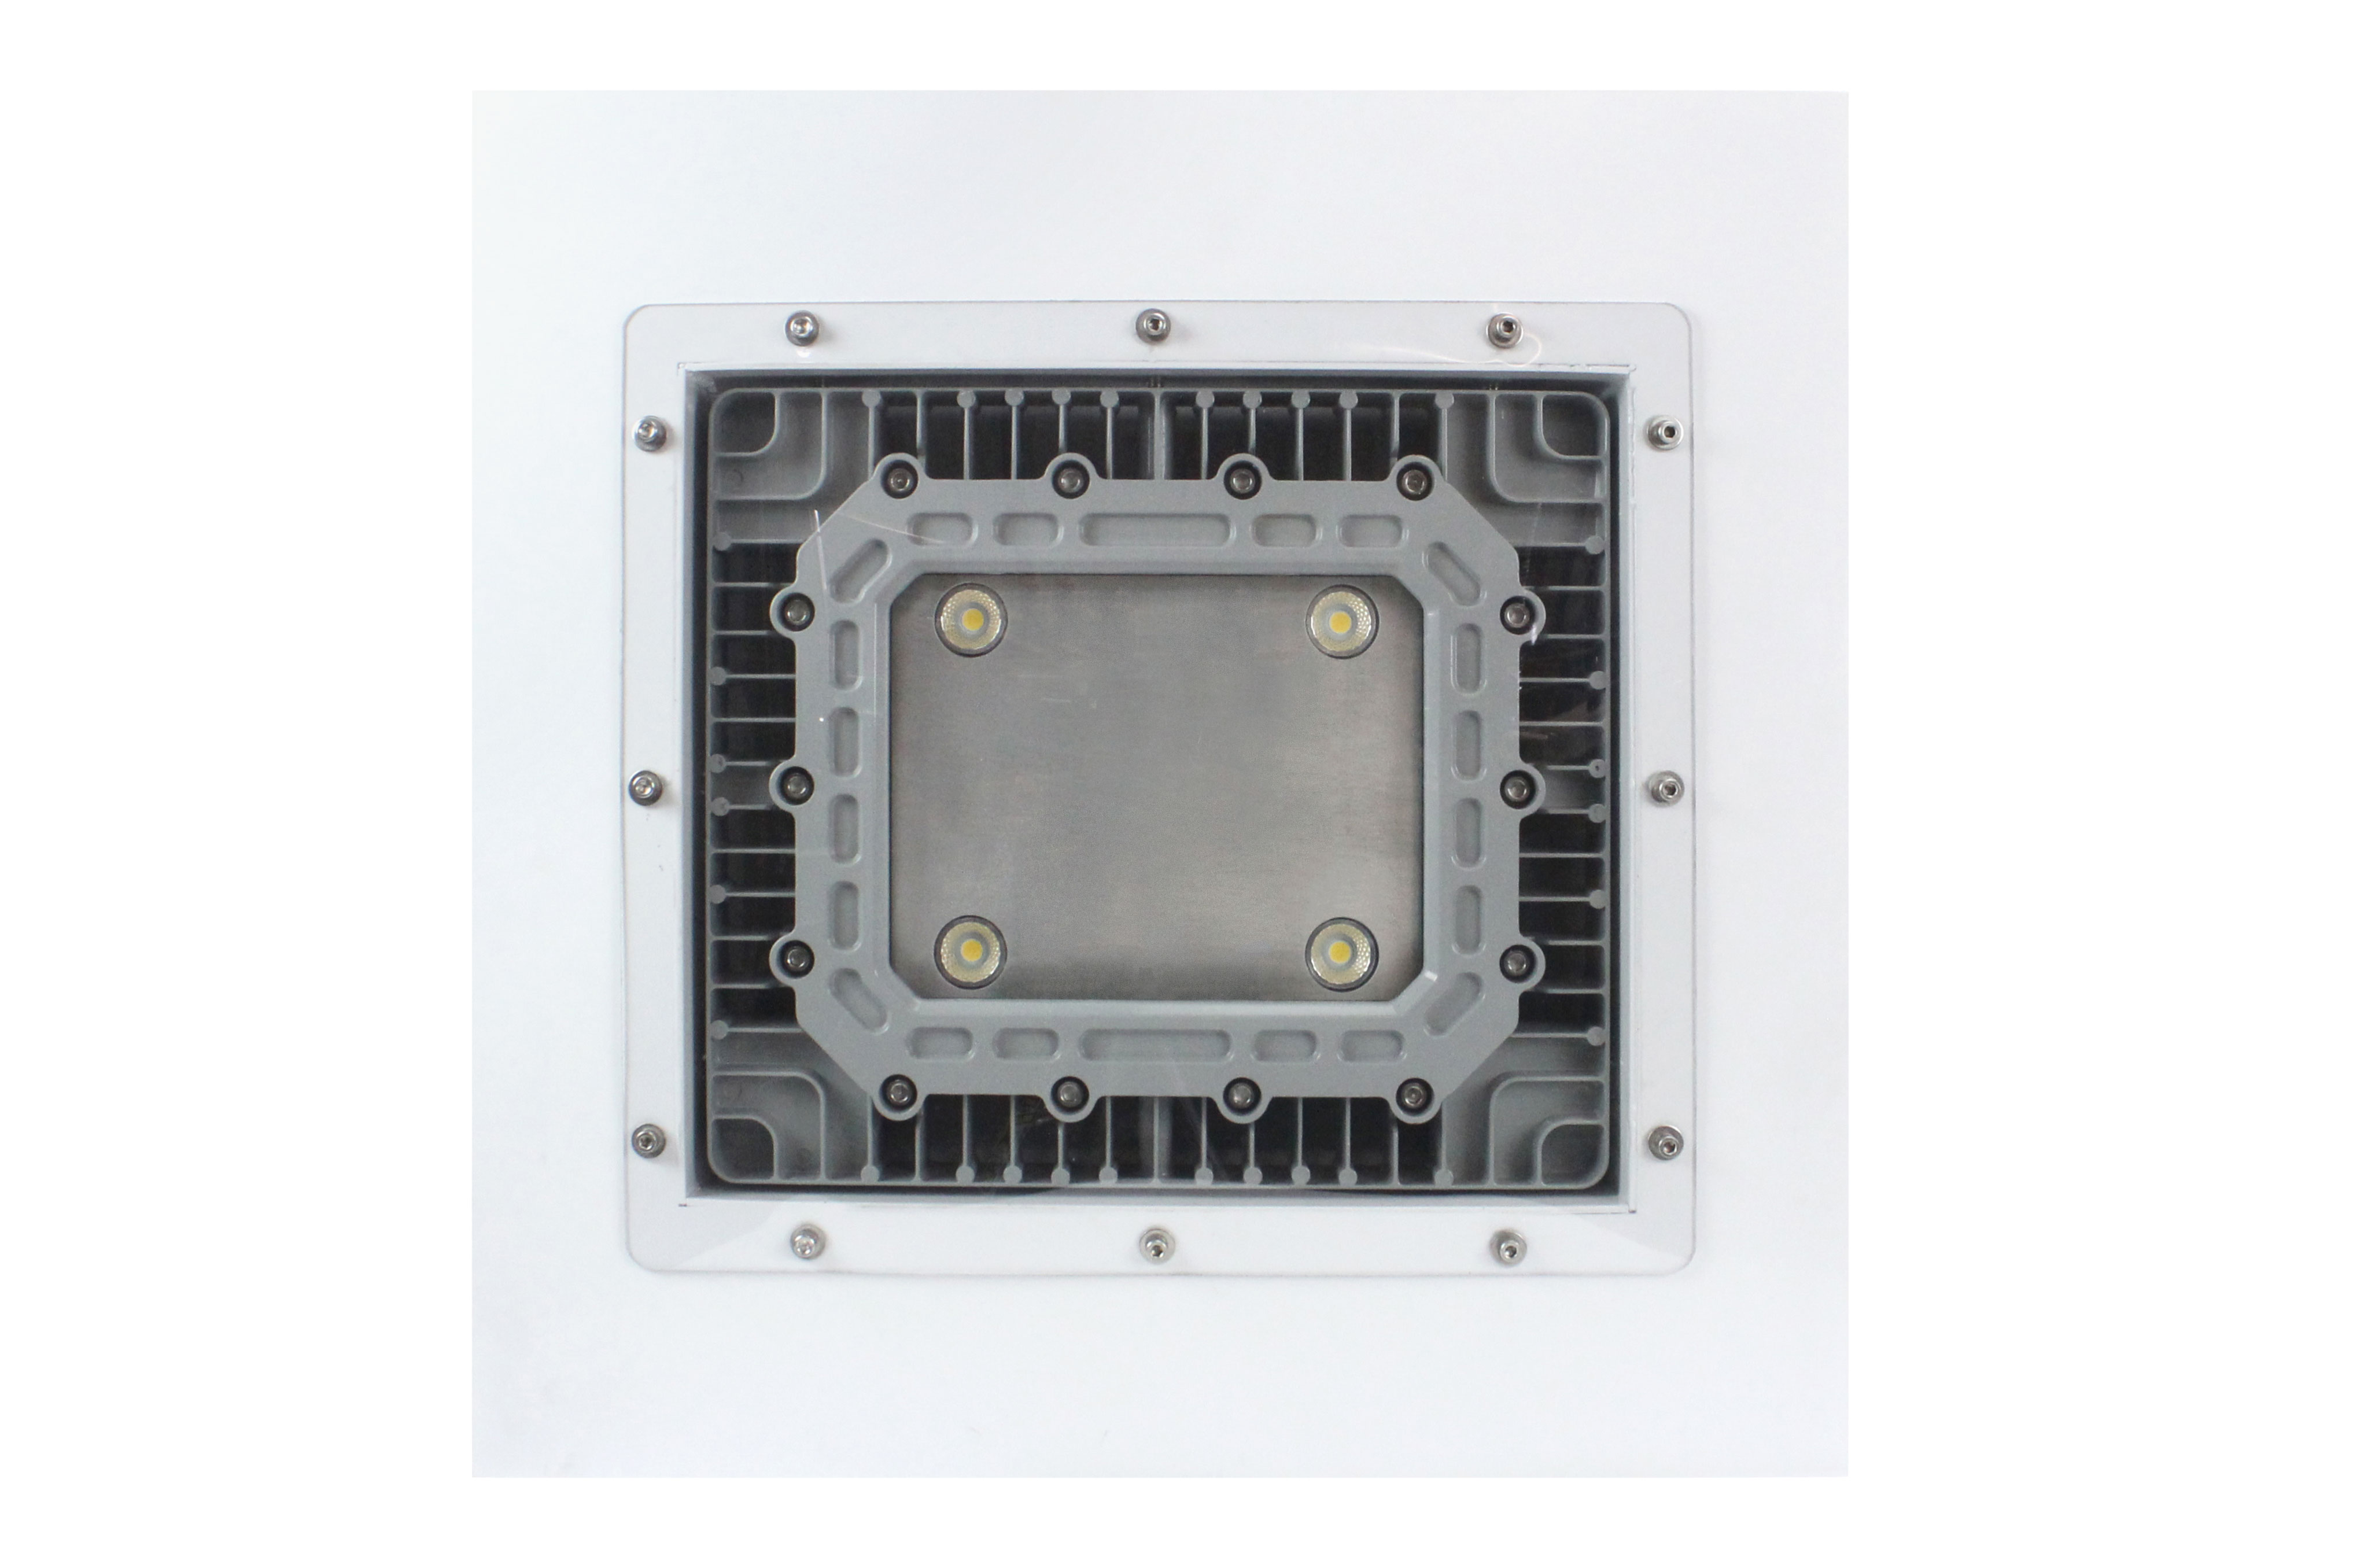 Class 1 Division 1 LED Light Fixture for Lay-In Applications